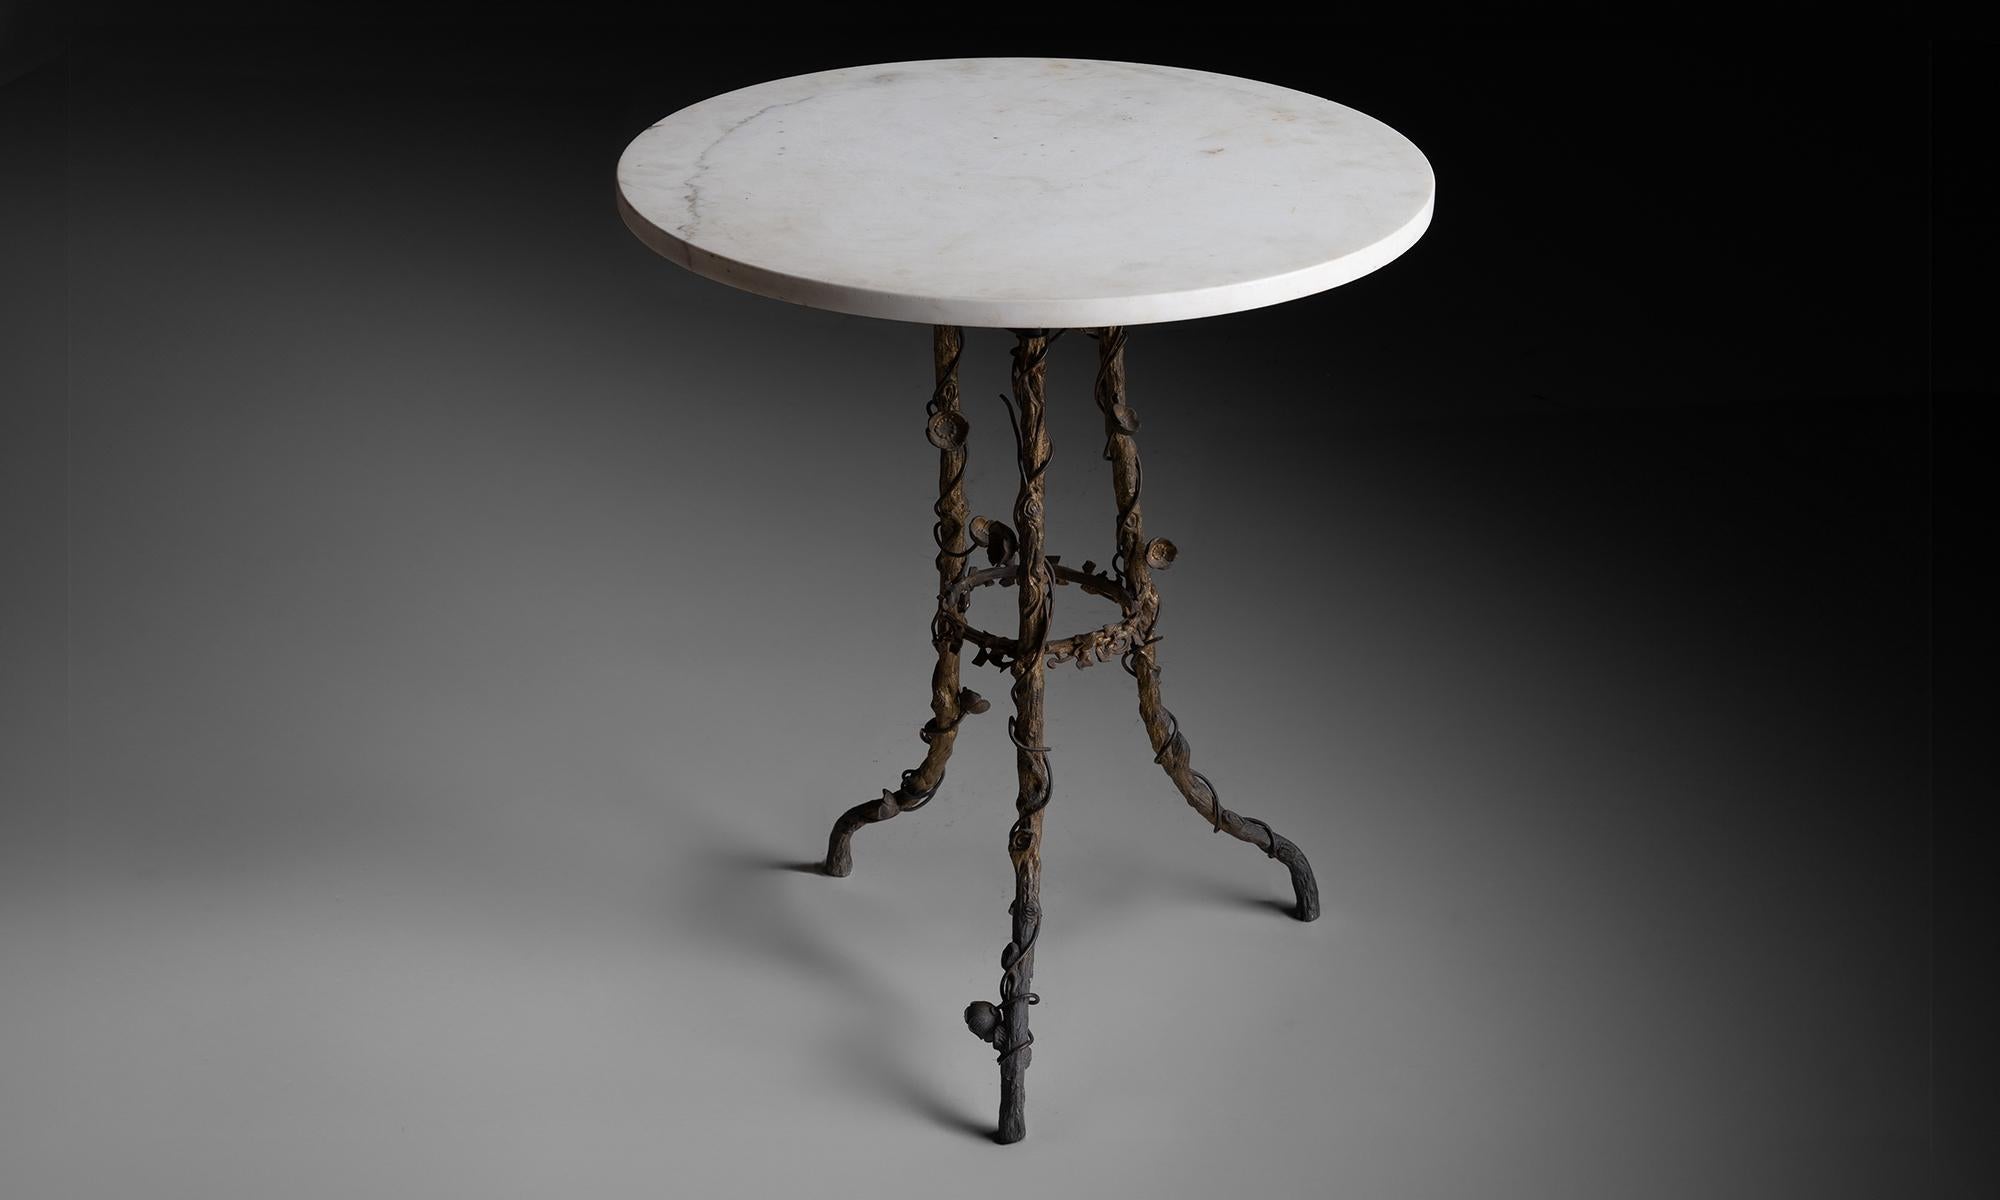 England circa 1890

Composed of gilt brass in carved floral design with circular marble tabletop.

28